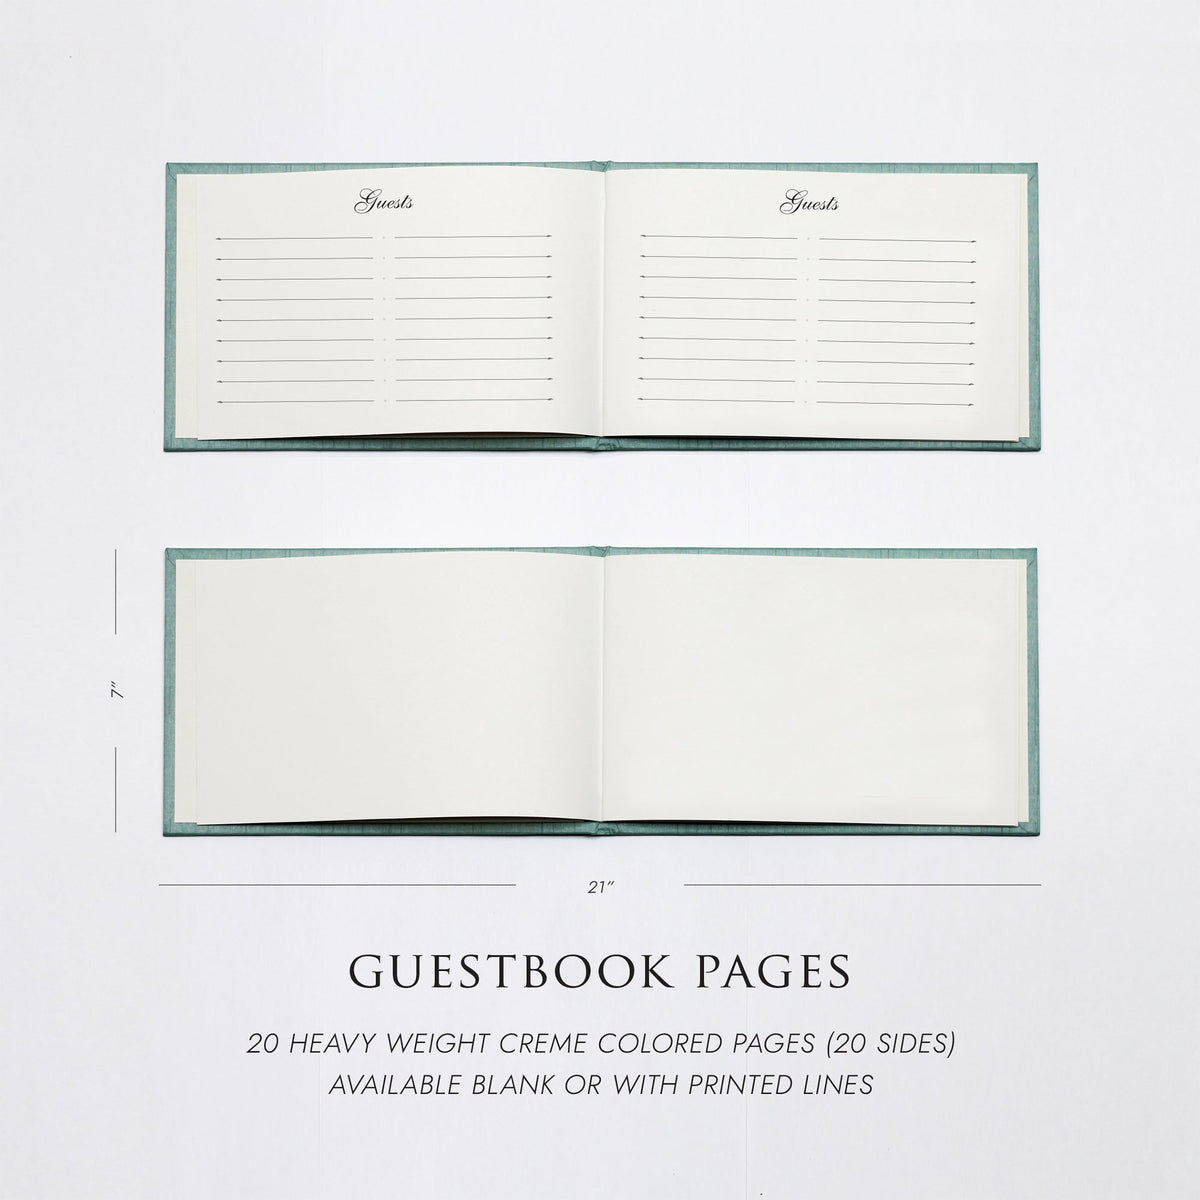 Guestbook Embossed with “Guests” | Cover: White Vegan Leather | Available Personalized